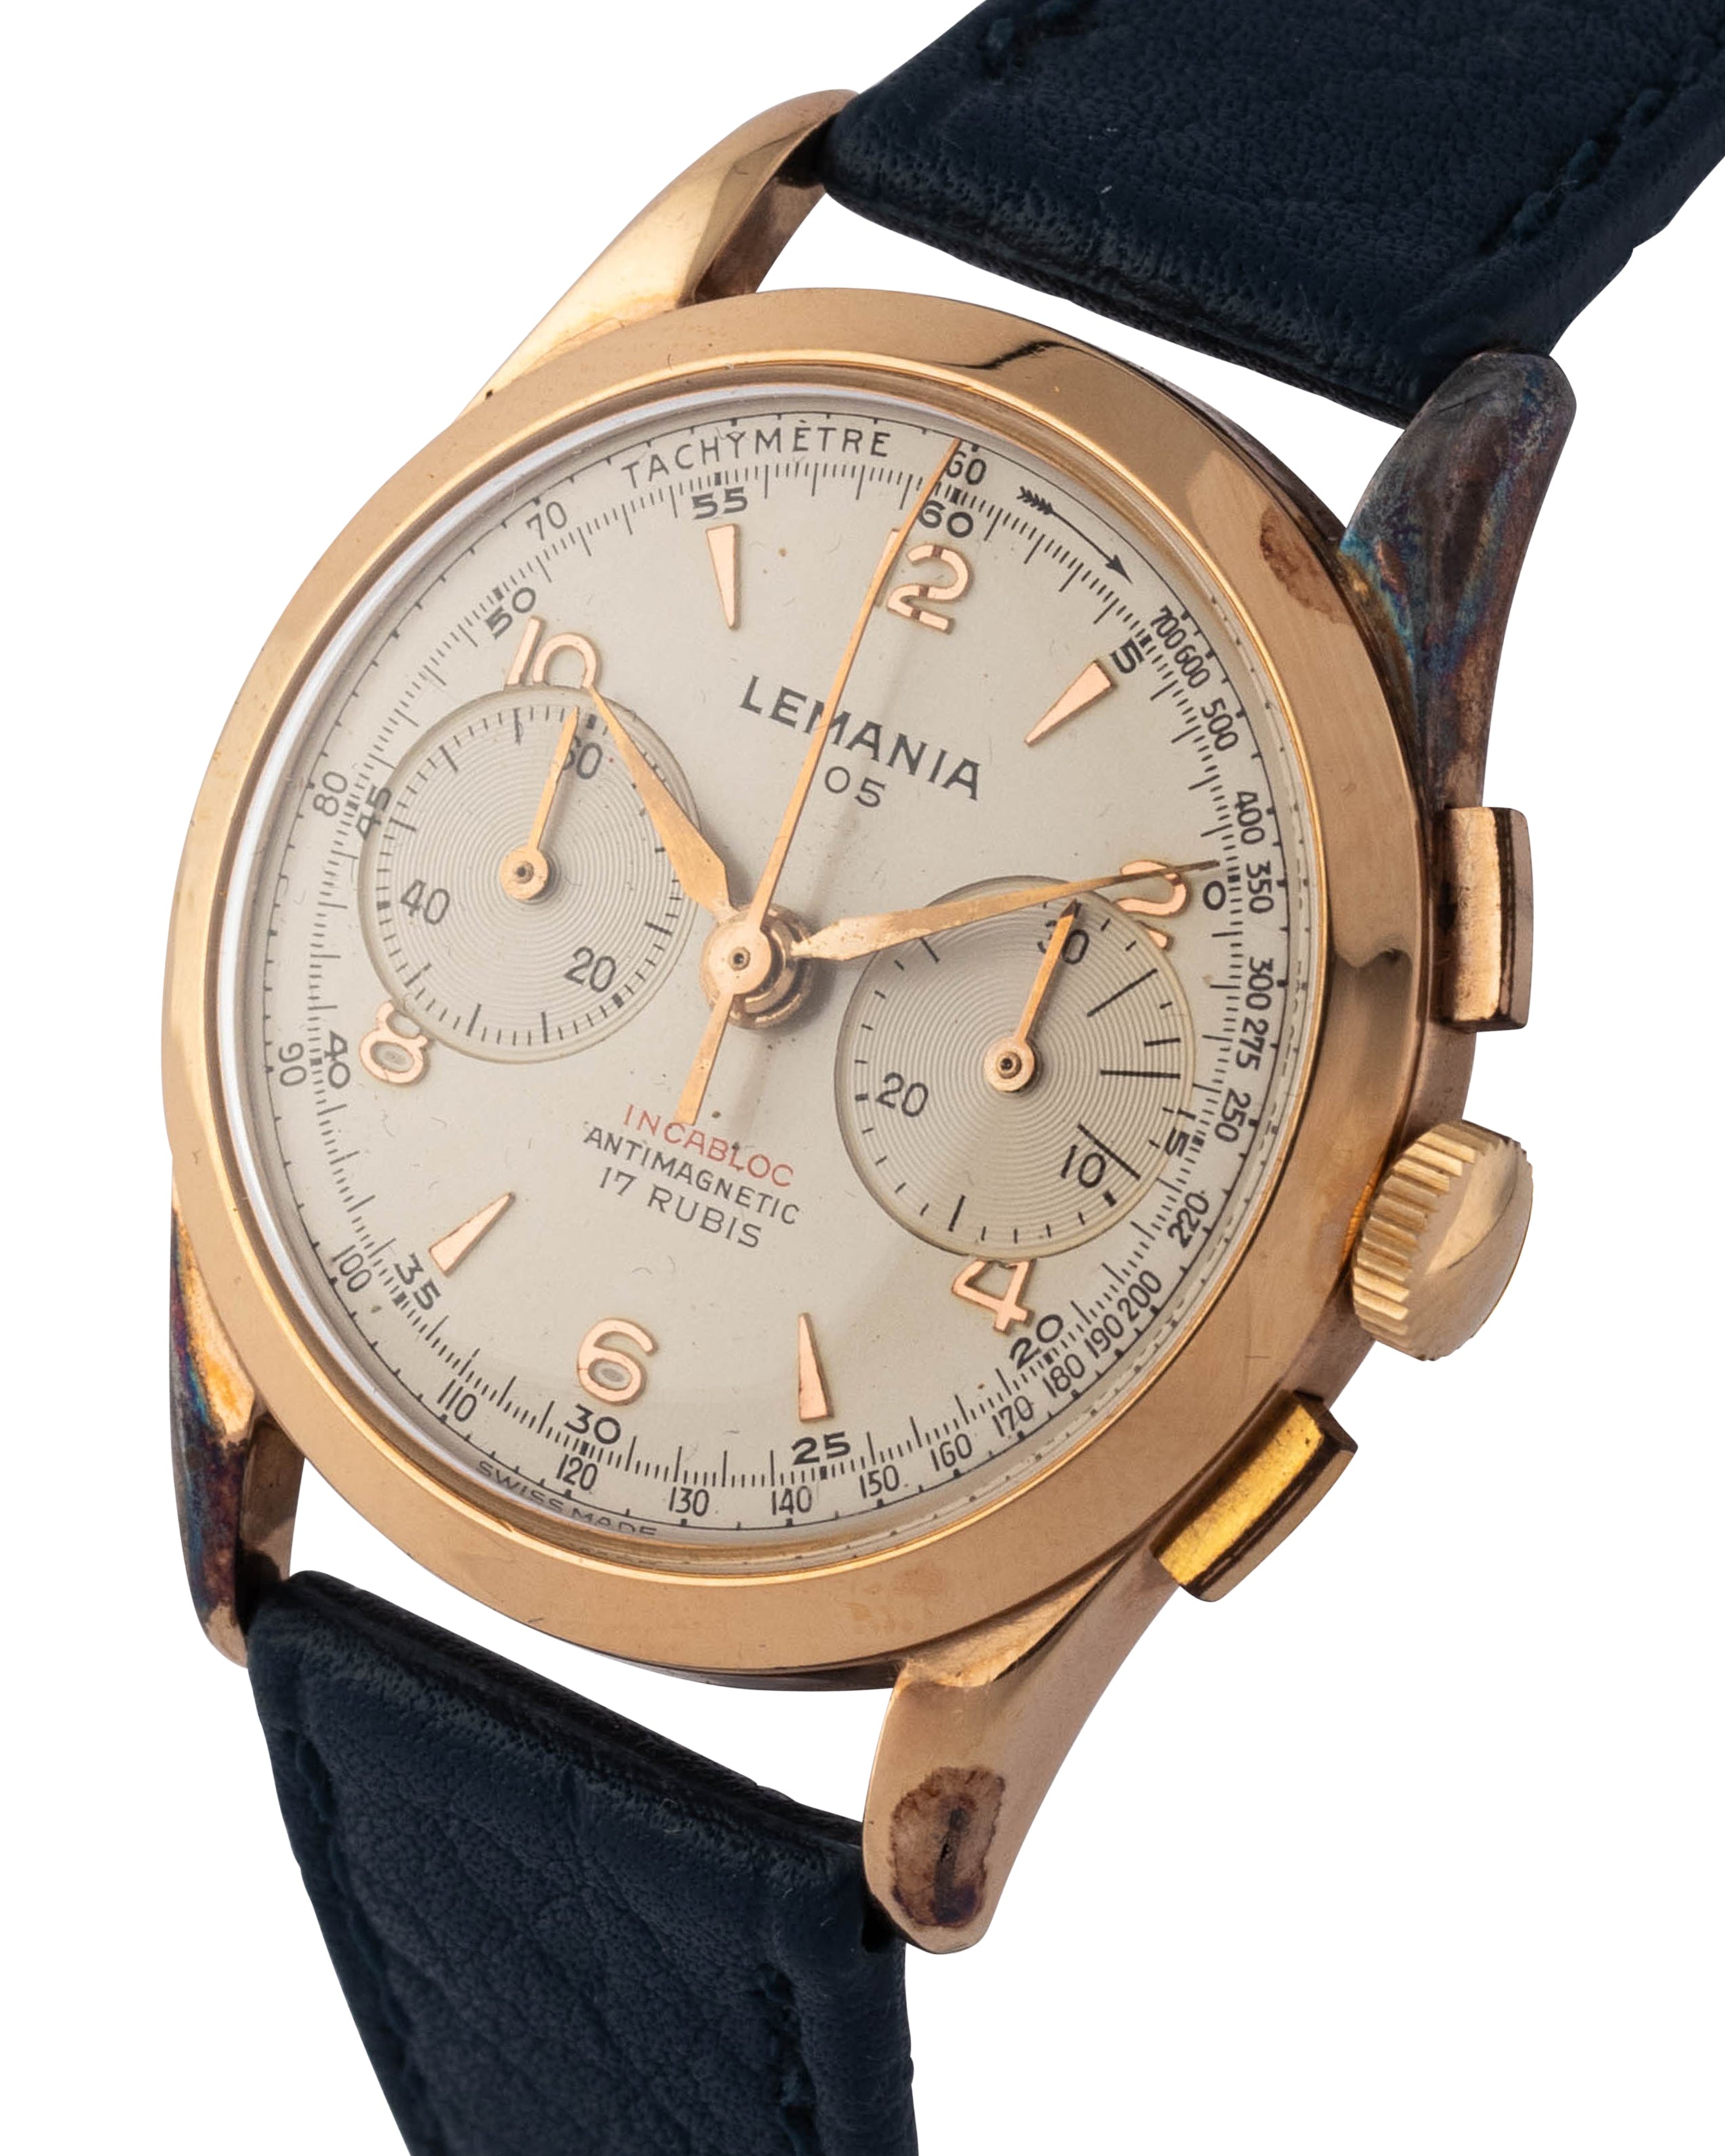 Lemania Chronograph "105 Incabloc" wrist watch, yellow gold case with white dial 